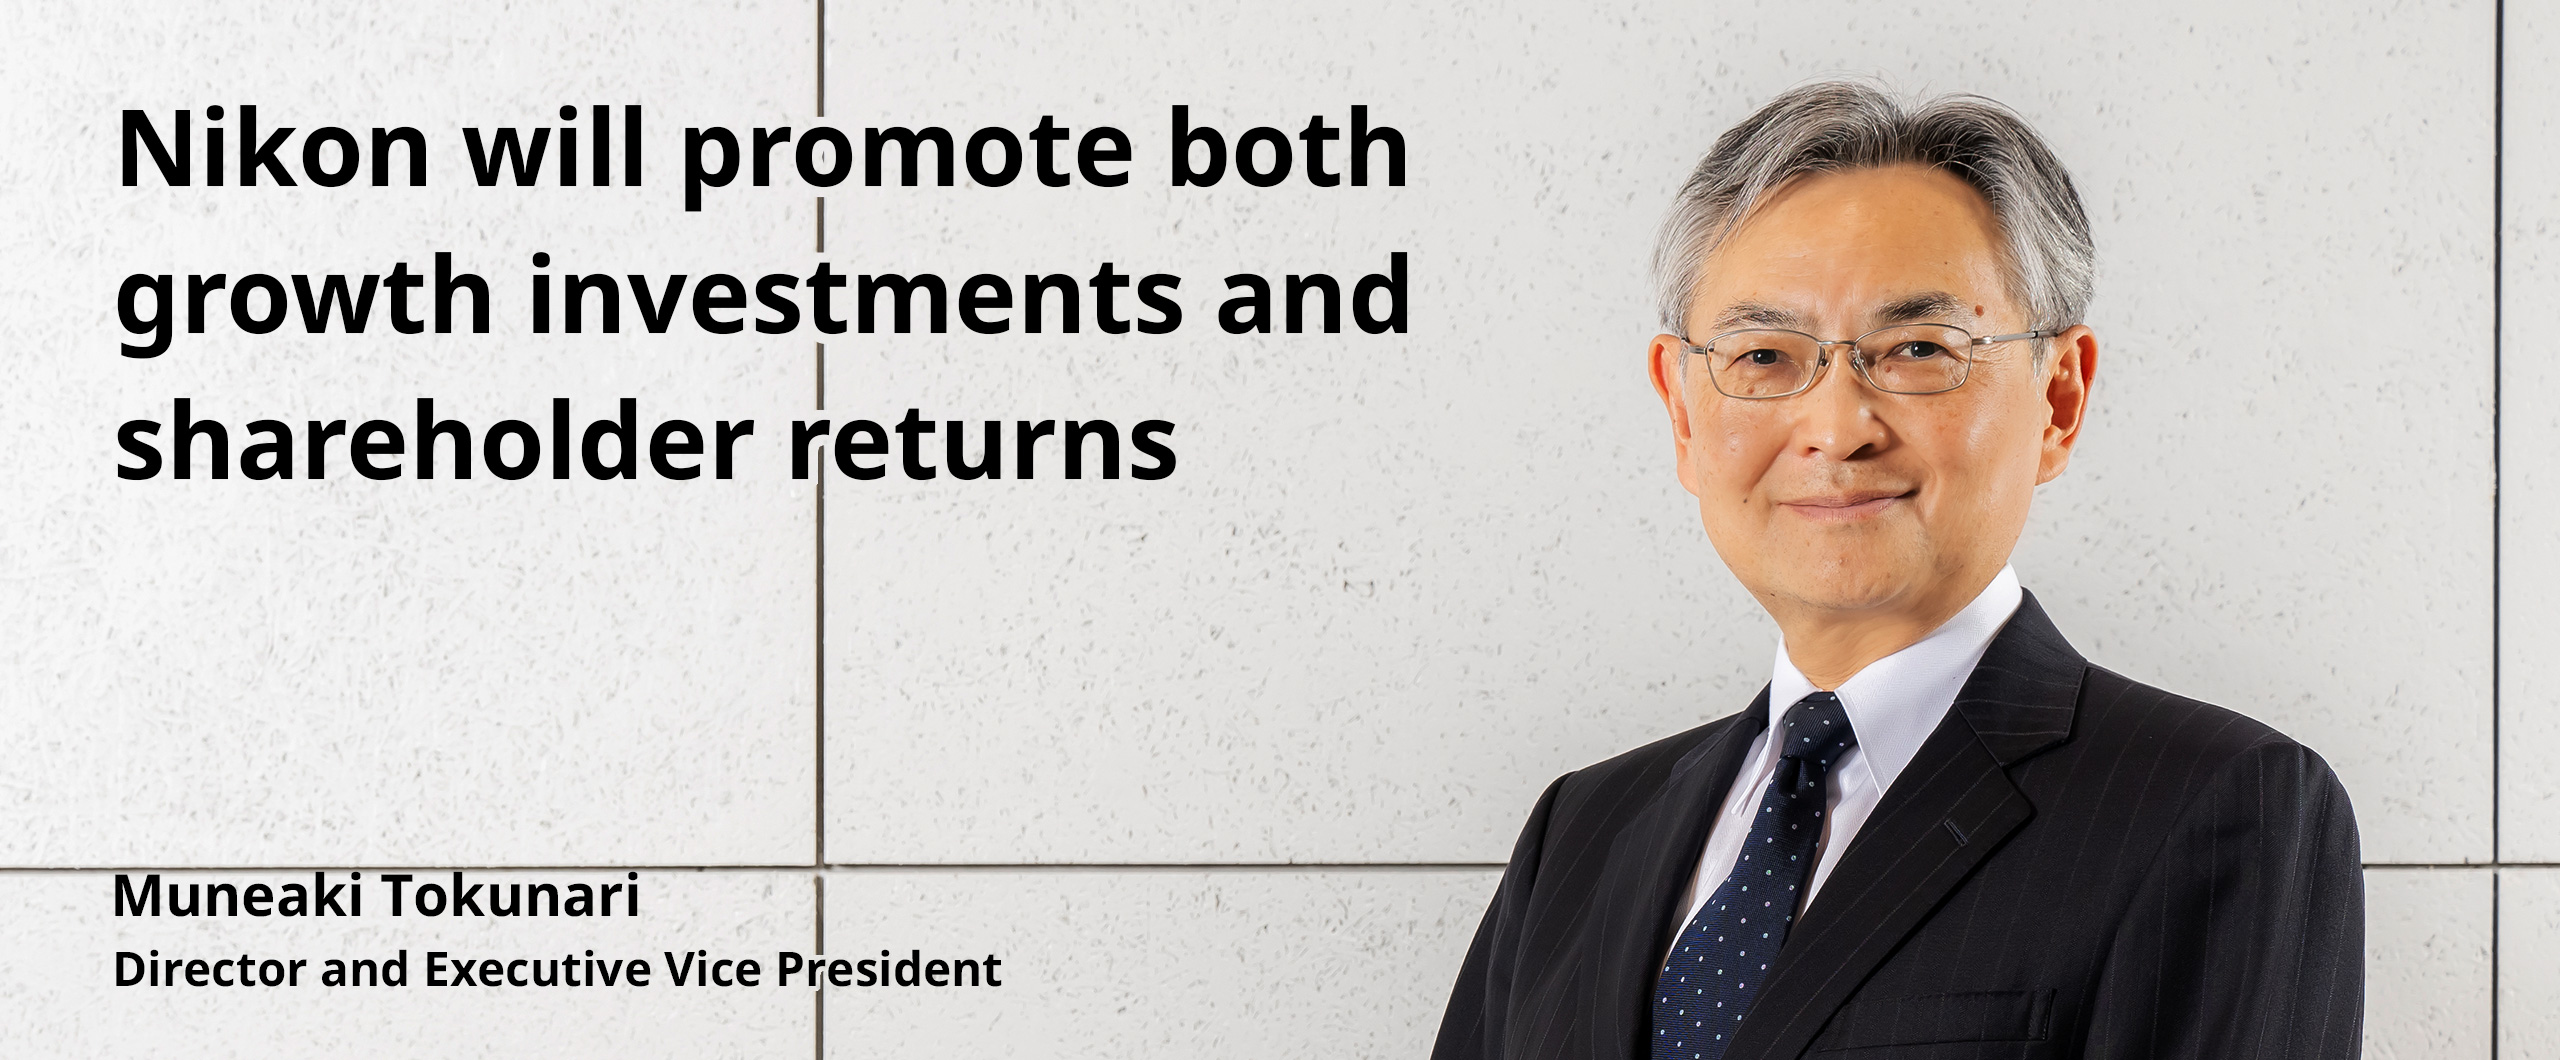 Nikon will promote both growth investments and shareholder returns. Muneaki Tokunari Director and Executive Vice President